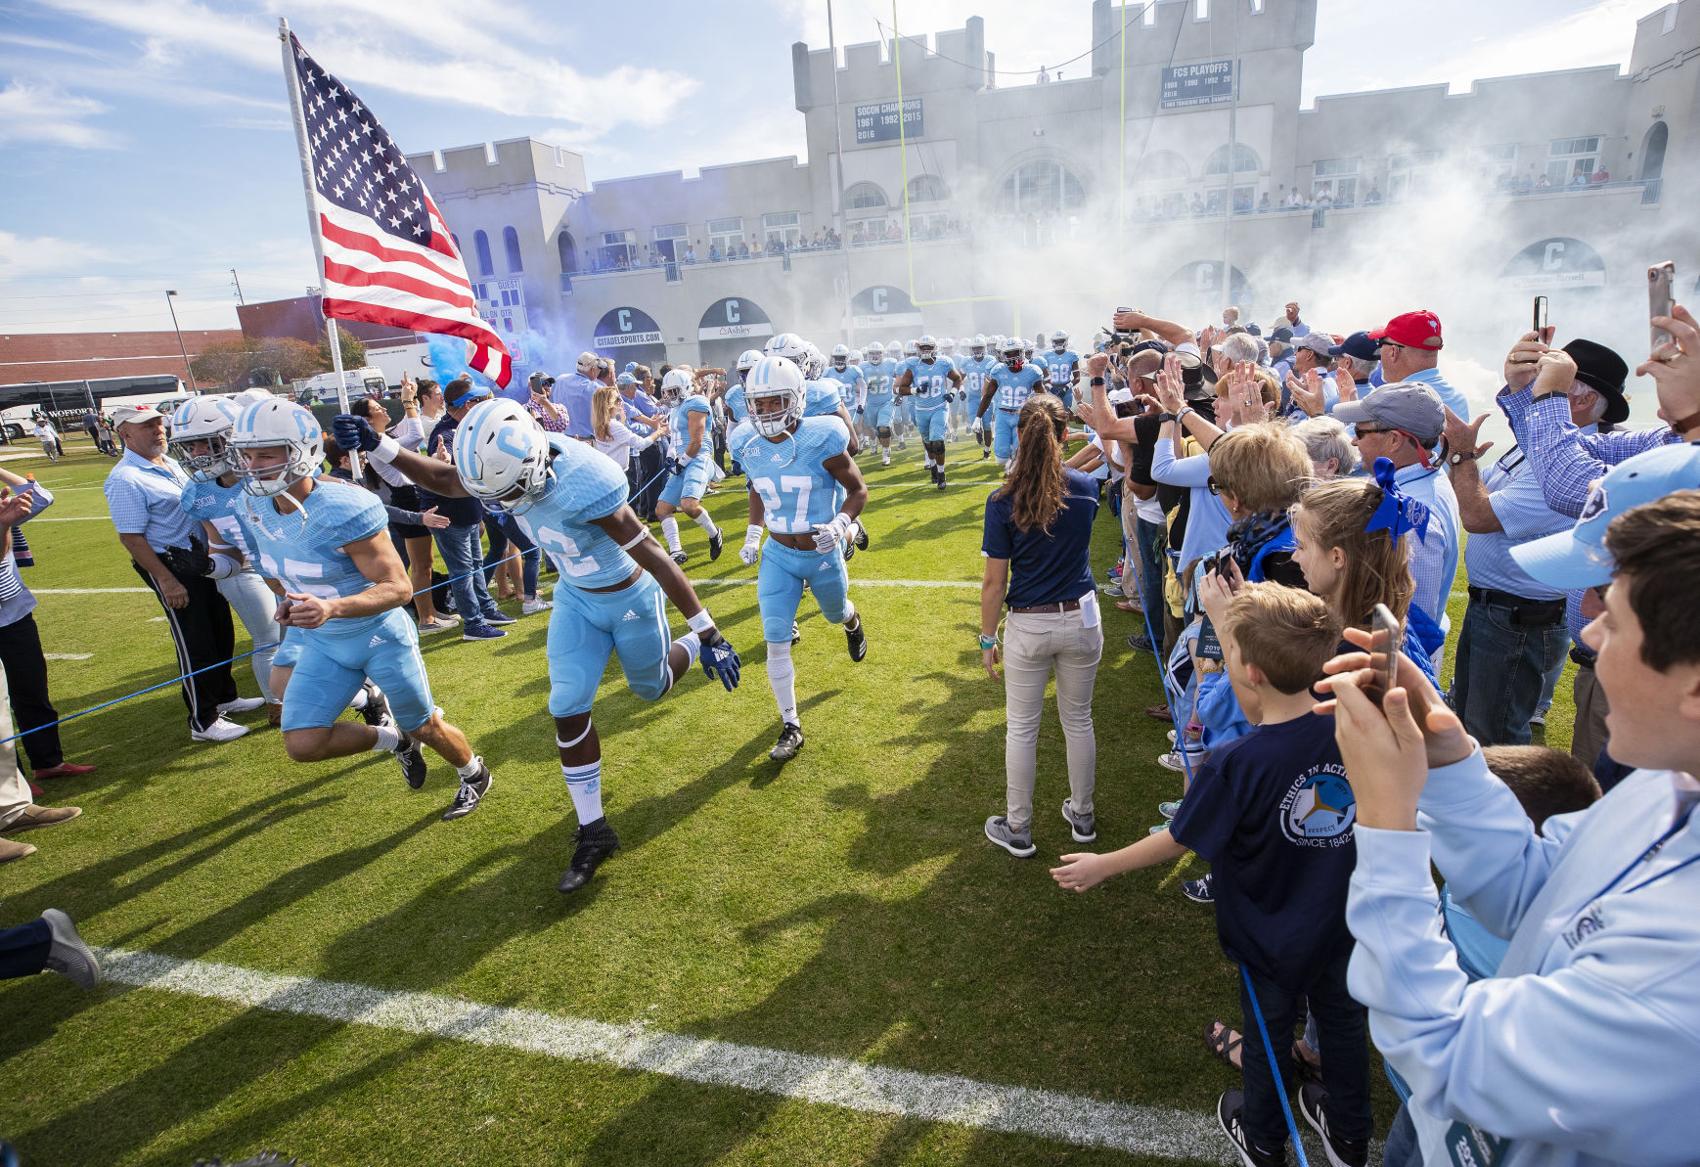 Citadel's 2020 football schedule includes six home games, payday at